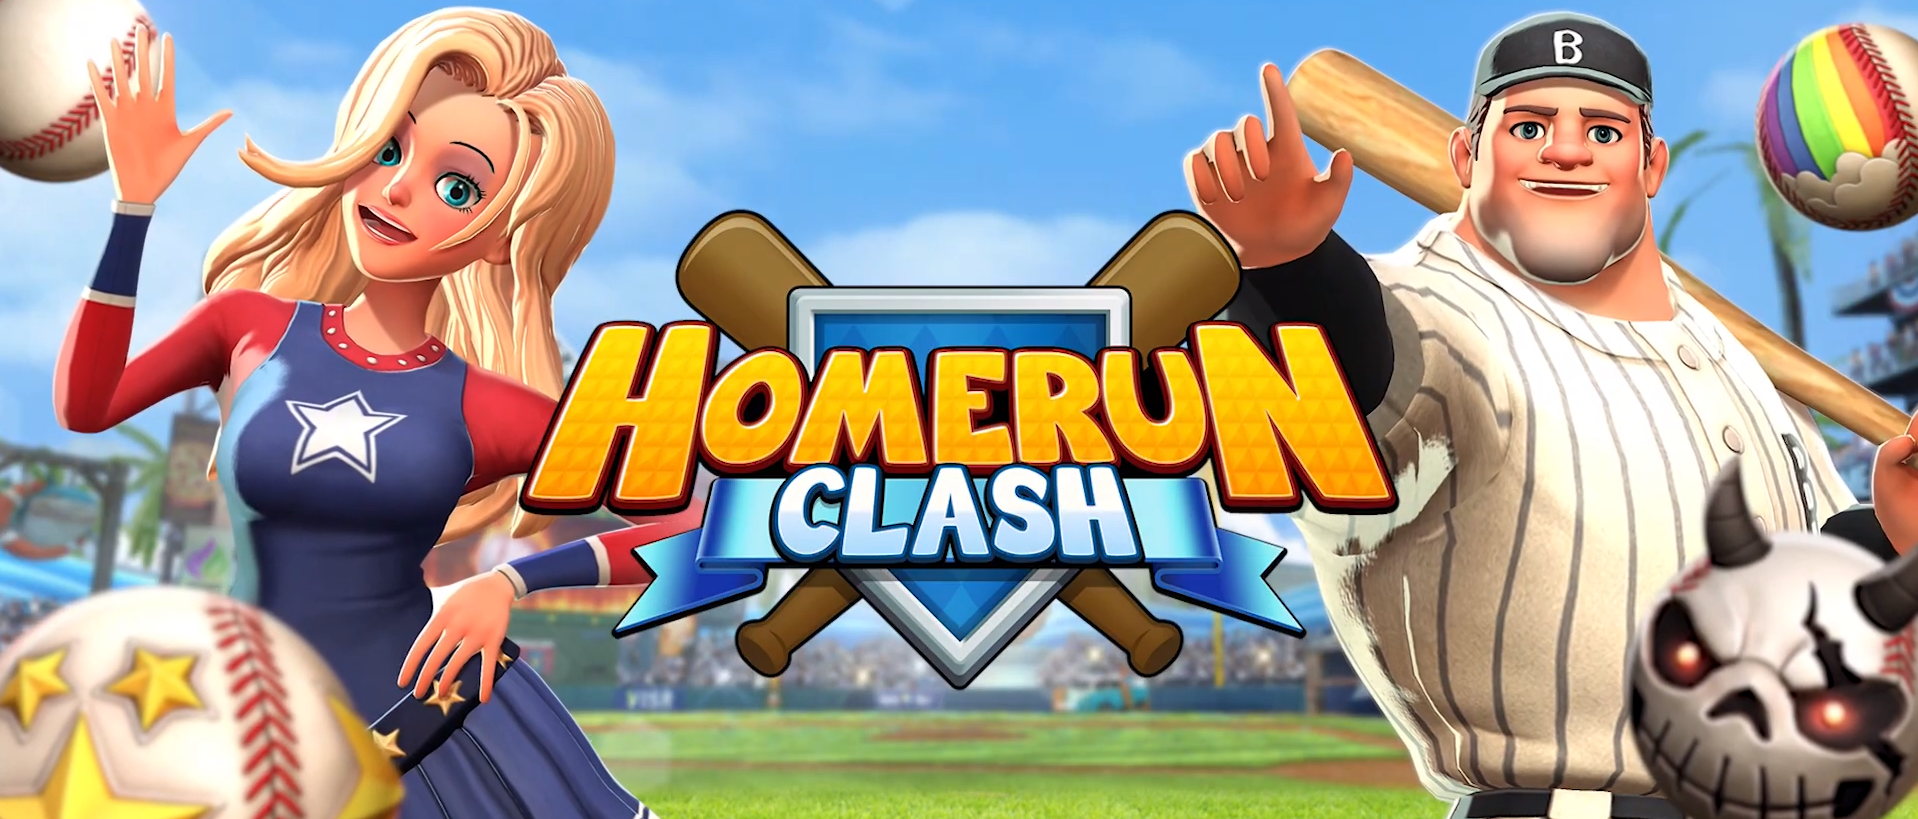 Download Homerun Clash on PC with NoxPlayer Appcenter